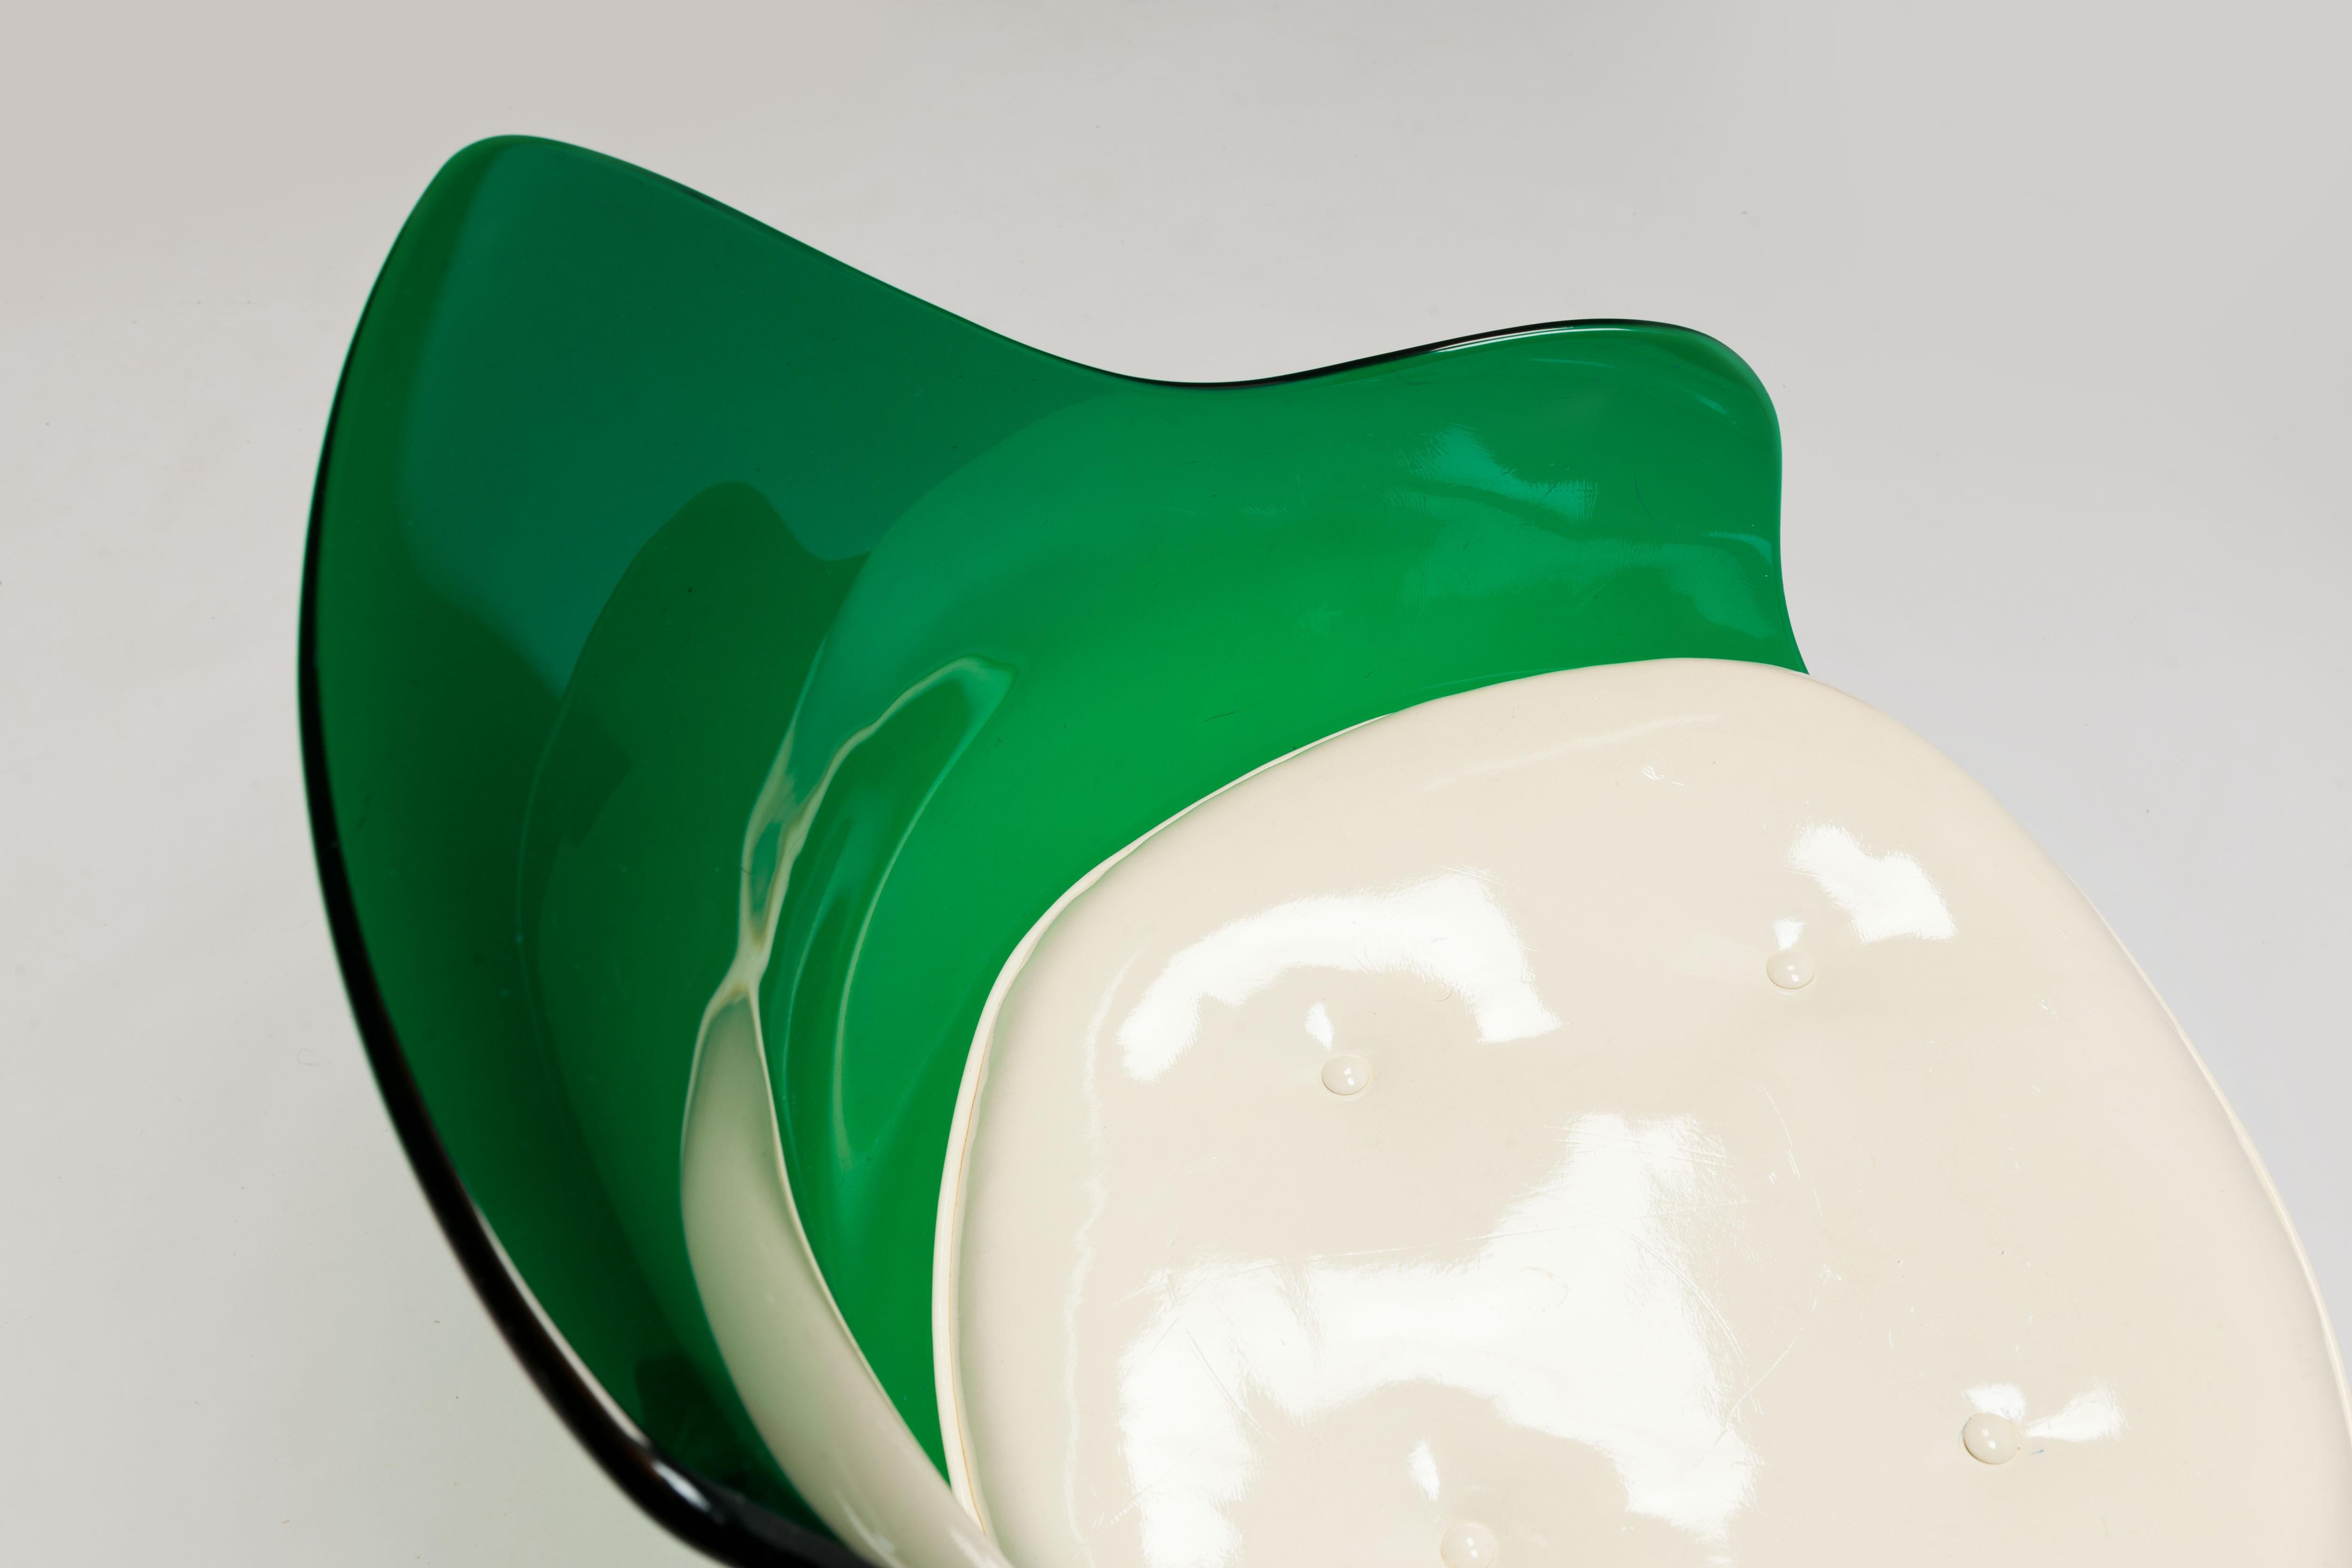 Rare Green Edition 'Champagne' Chair by Estelle & Erwin Laverne 1